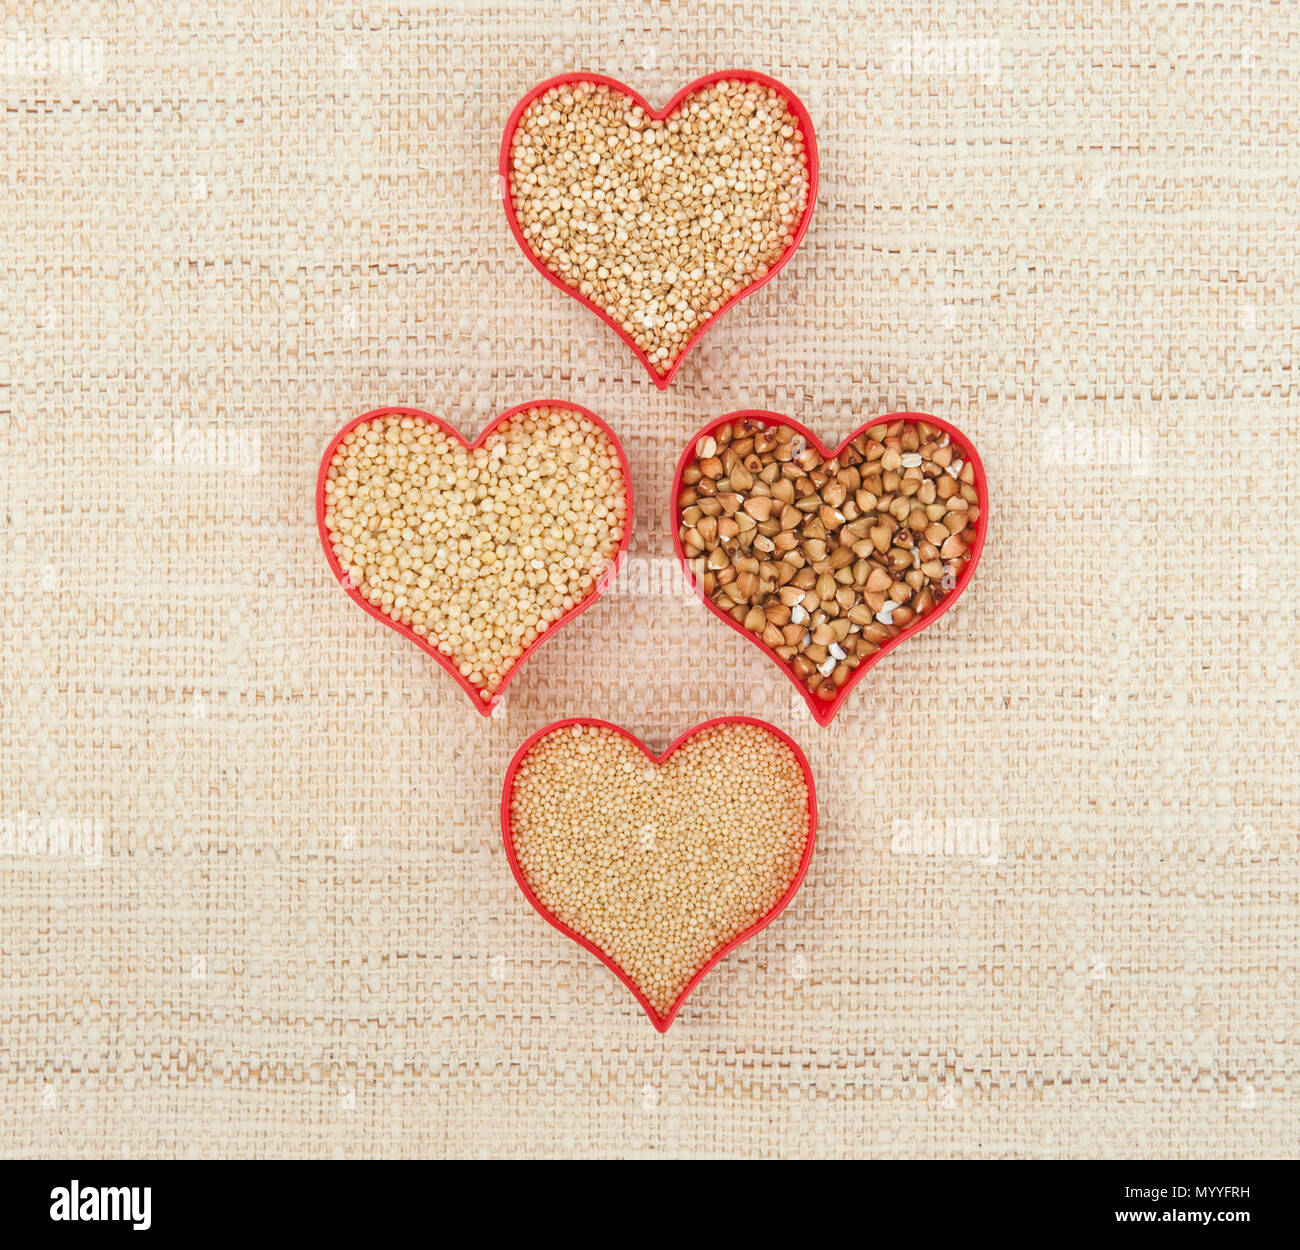 Four red hearts filled with gluten-free seeds quinoa, millet, amaranth and buckwheat on canvass Stock Photo